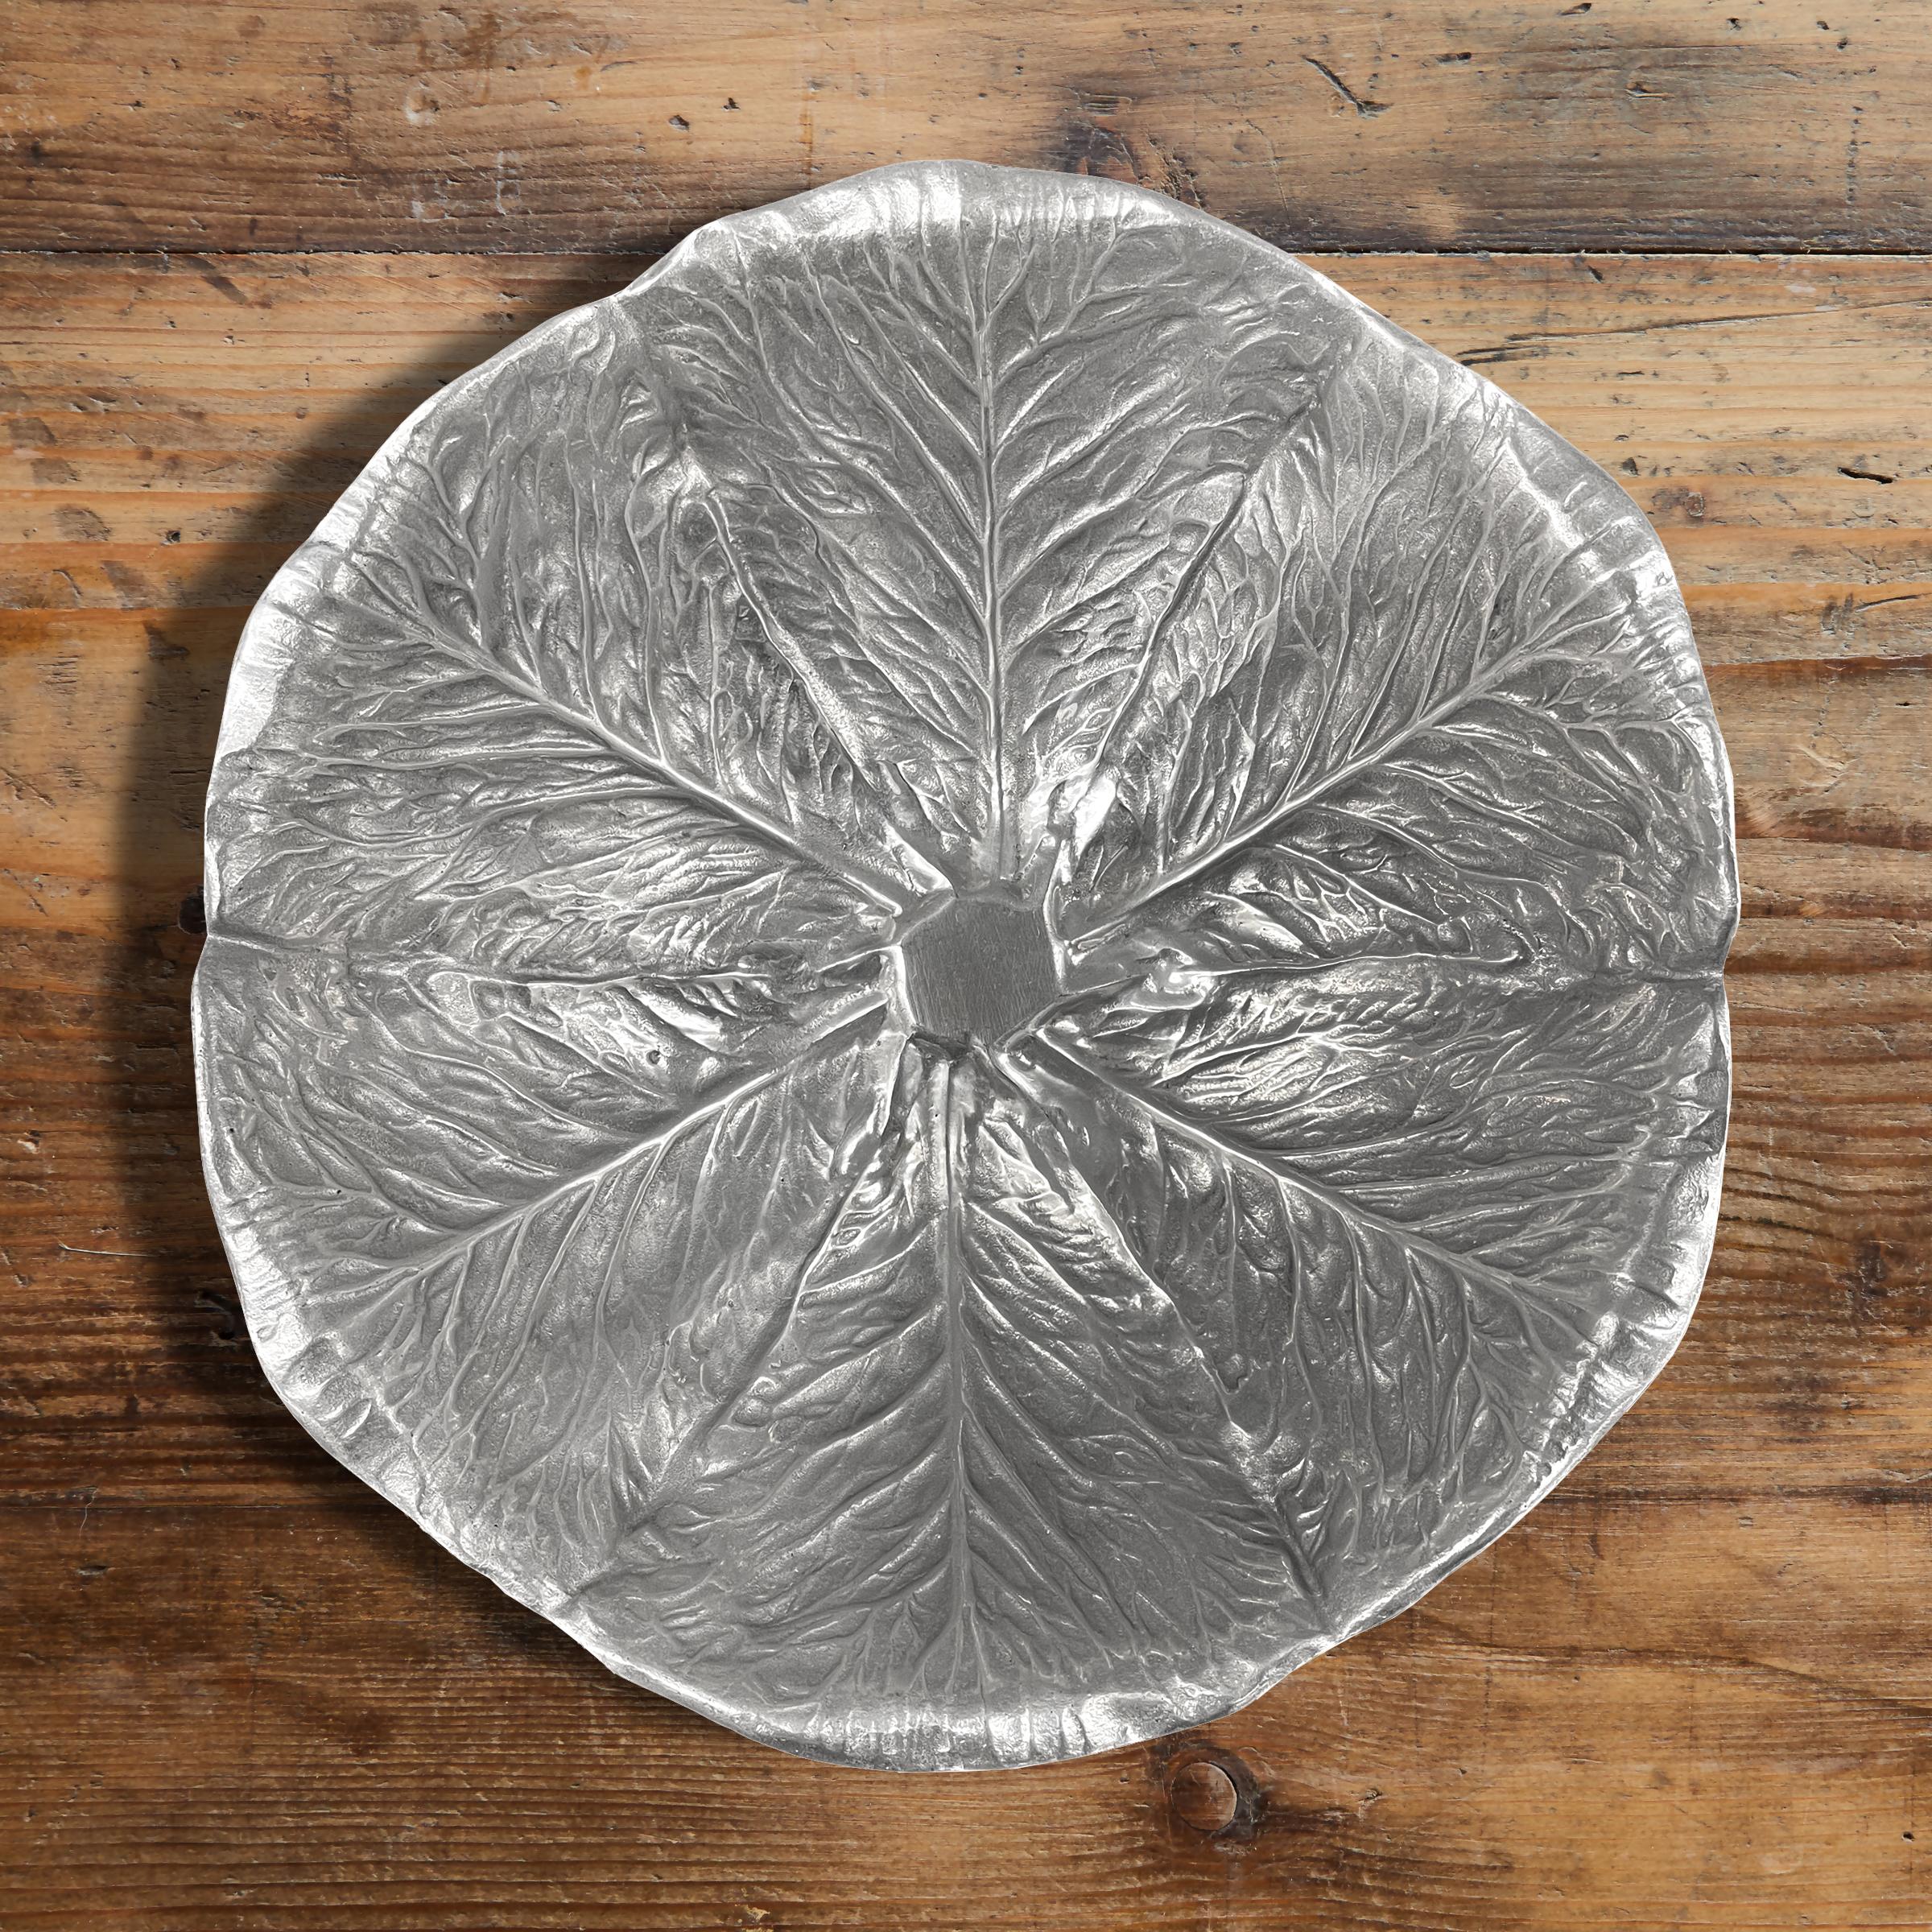 A rather large vintage cast pewter cabbage bowl with a wonderful lettuce texture on the inside as well as the outside, and just waiting for a fabulous garden salad to serve at your next fête!